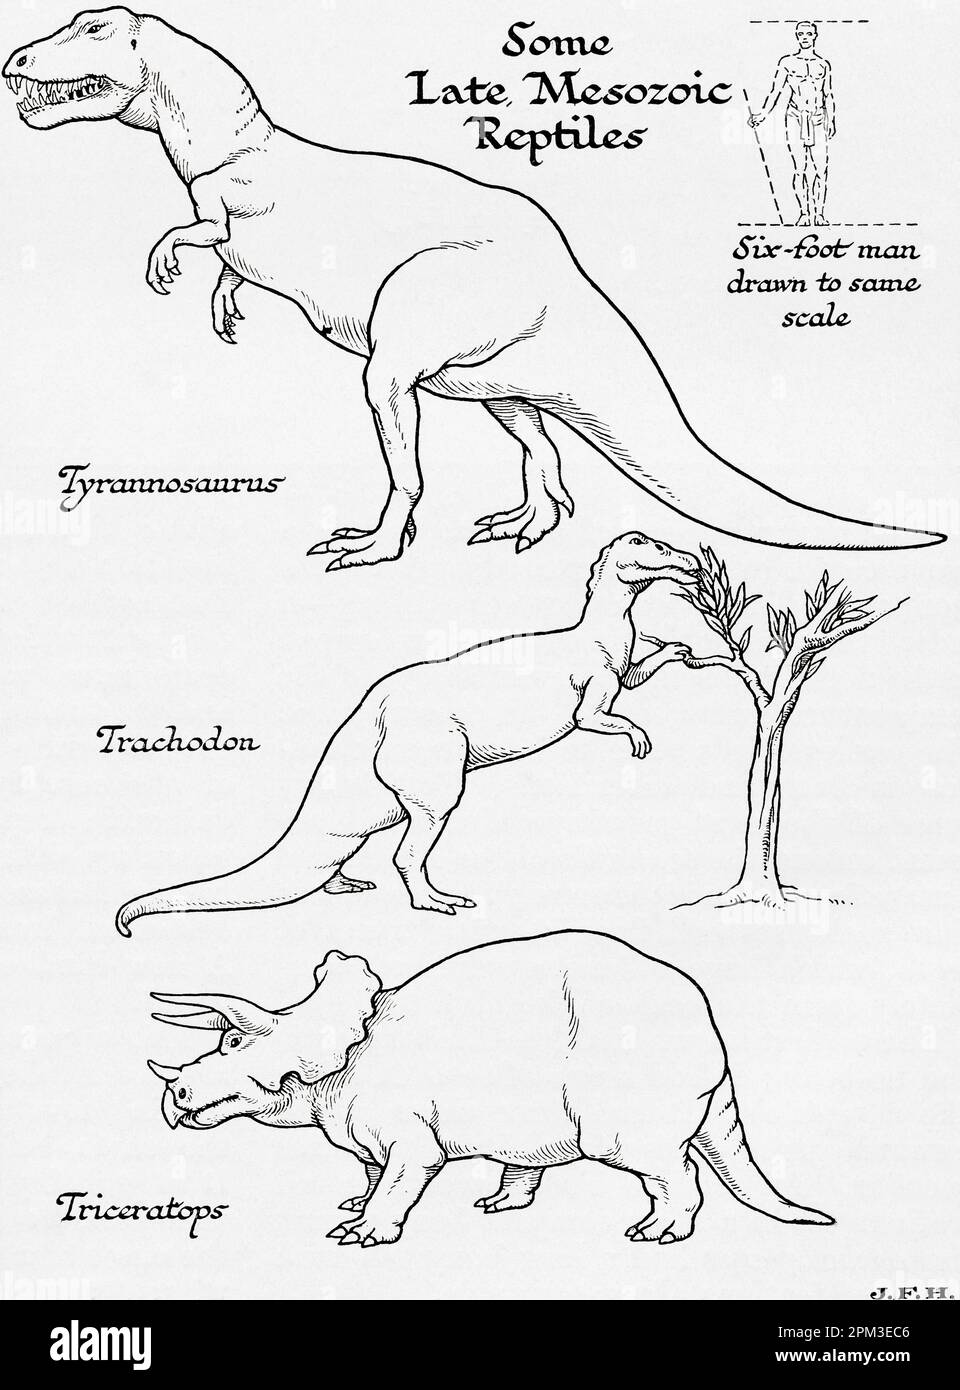 Late Mesozoic Era reptiles.  Tyrannosaurus, Trachodon and Triceraptops.  Shown in the diagram a six foot man drawn to the same scale as other figures. From the book Outline of History by H.G. Wells, published 1920. Stock Photo